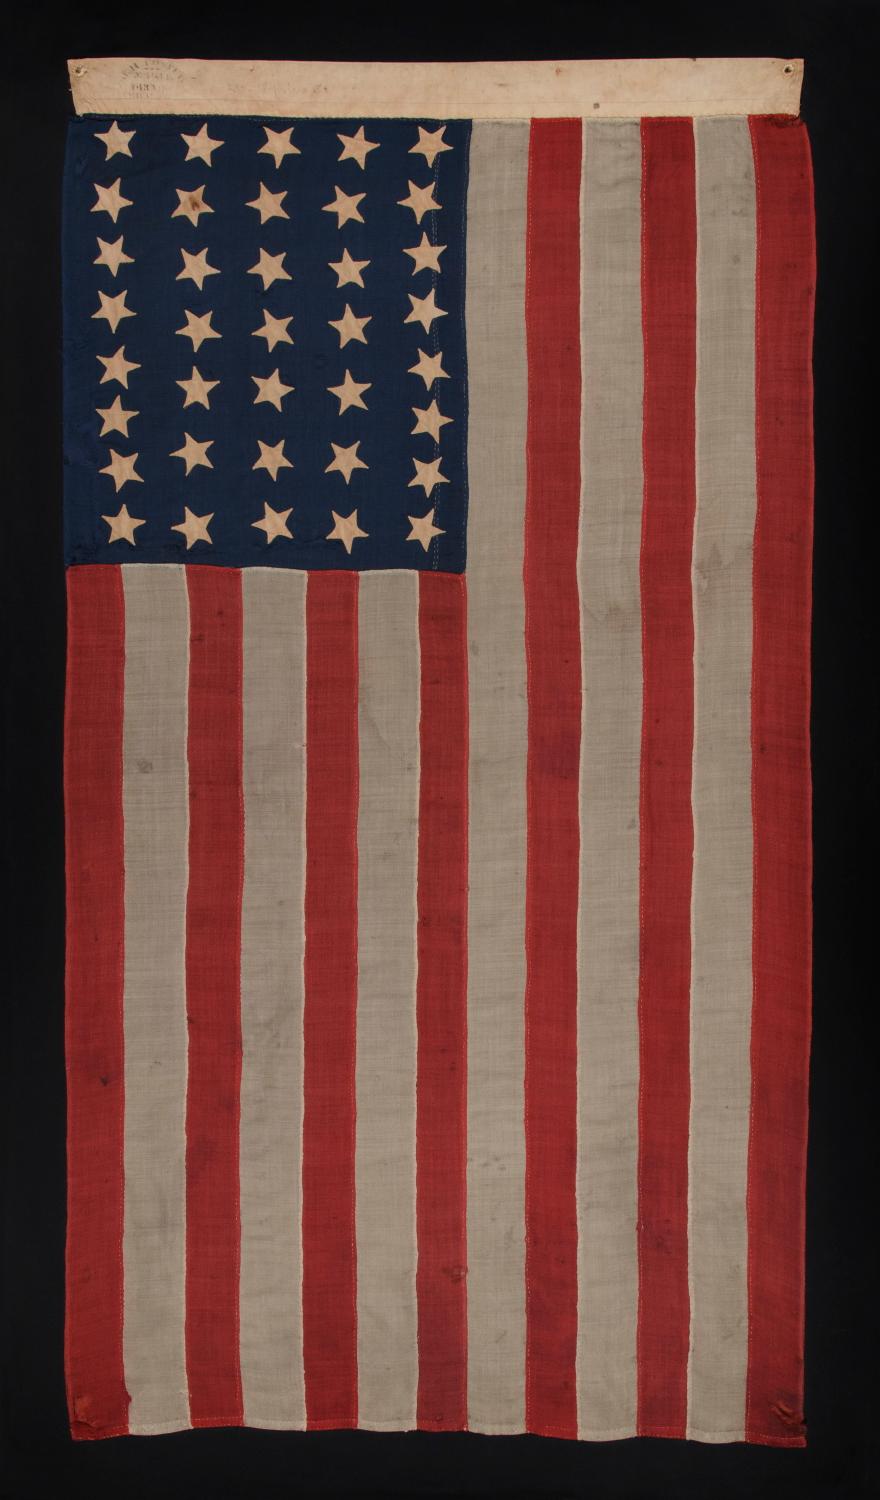 37 STAR ANTIQUE AMERICAN FLAG, ENTIRELY HAND SEWN AND IN AN ATTRACTIVE, SMALL SCALE FOR THE PERIOD, MADE BY JOSEPH H. FOSTER IN PHILADELPHIA BETWEEN 1867-1876, THE PERIOD WHEN NEBRASKA WAS THE MOST RECENT STATE TO JOIN THE UNION:

Entirely hand sewn